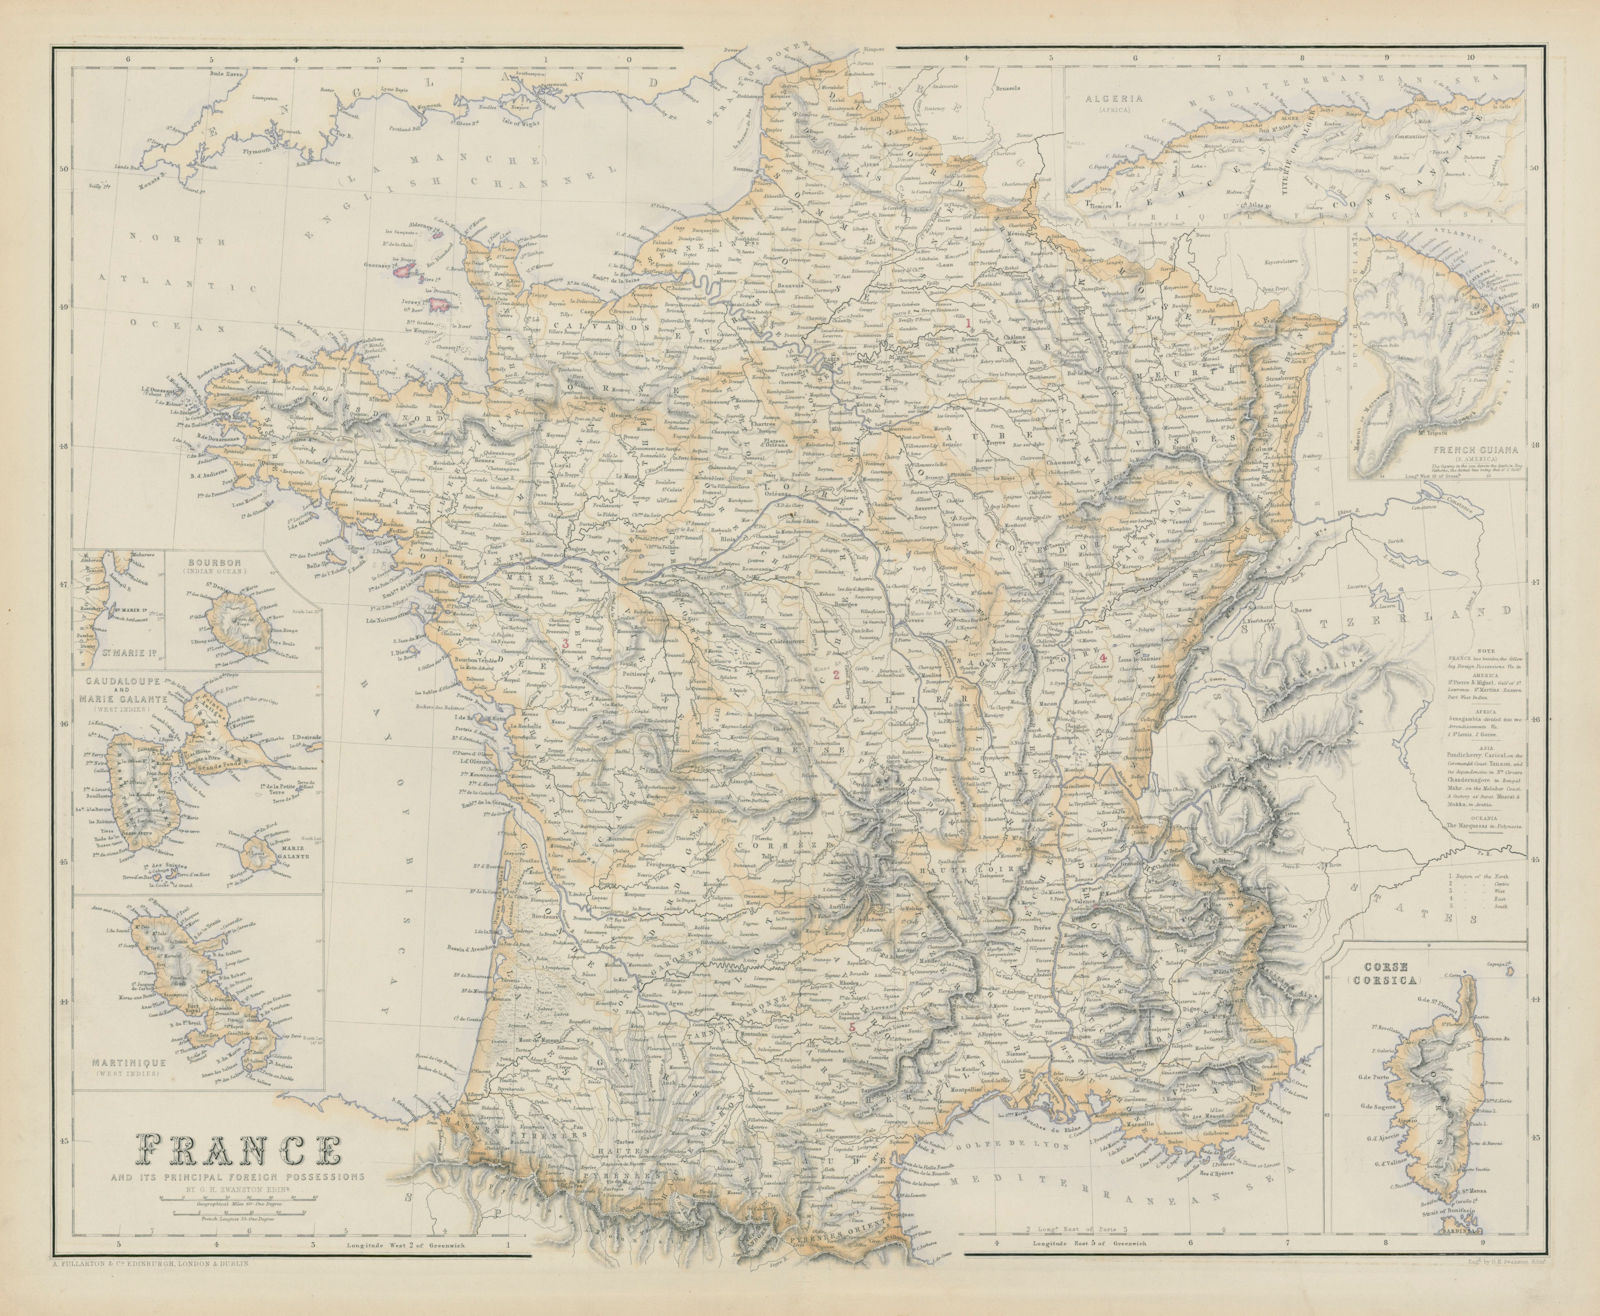 France & principal foreign possessions. Guadaloupe Martinique. SWANSTON 1860 map